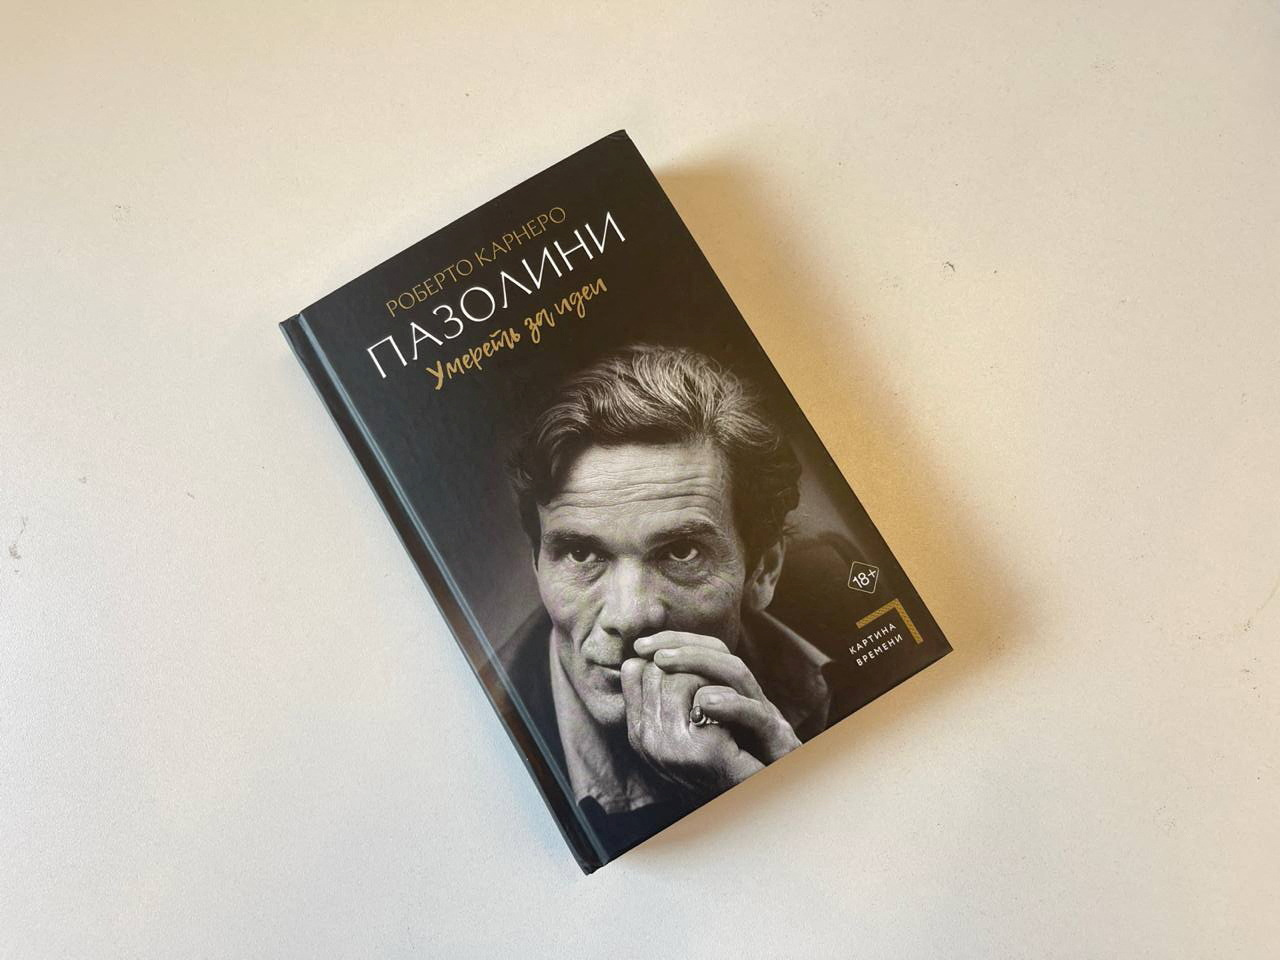 A handout photo of the book about film director Pier Paolo Pasolini, published in Russia